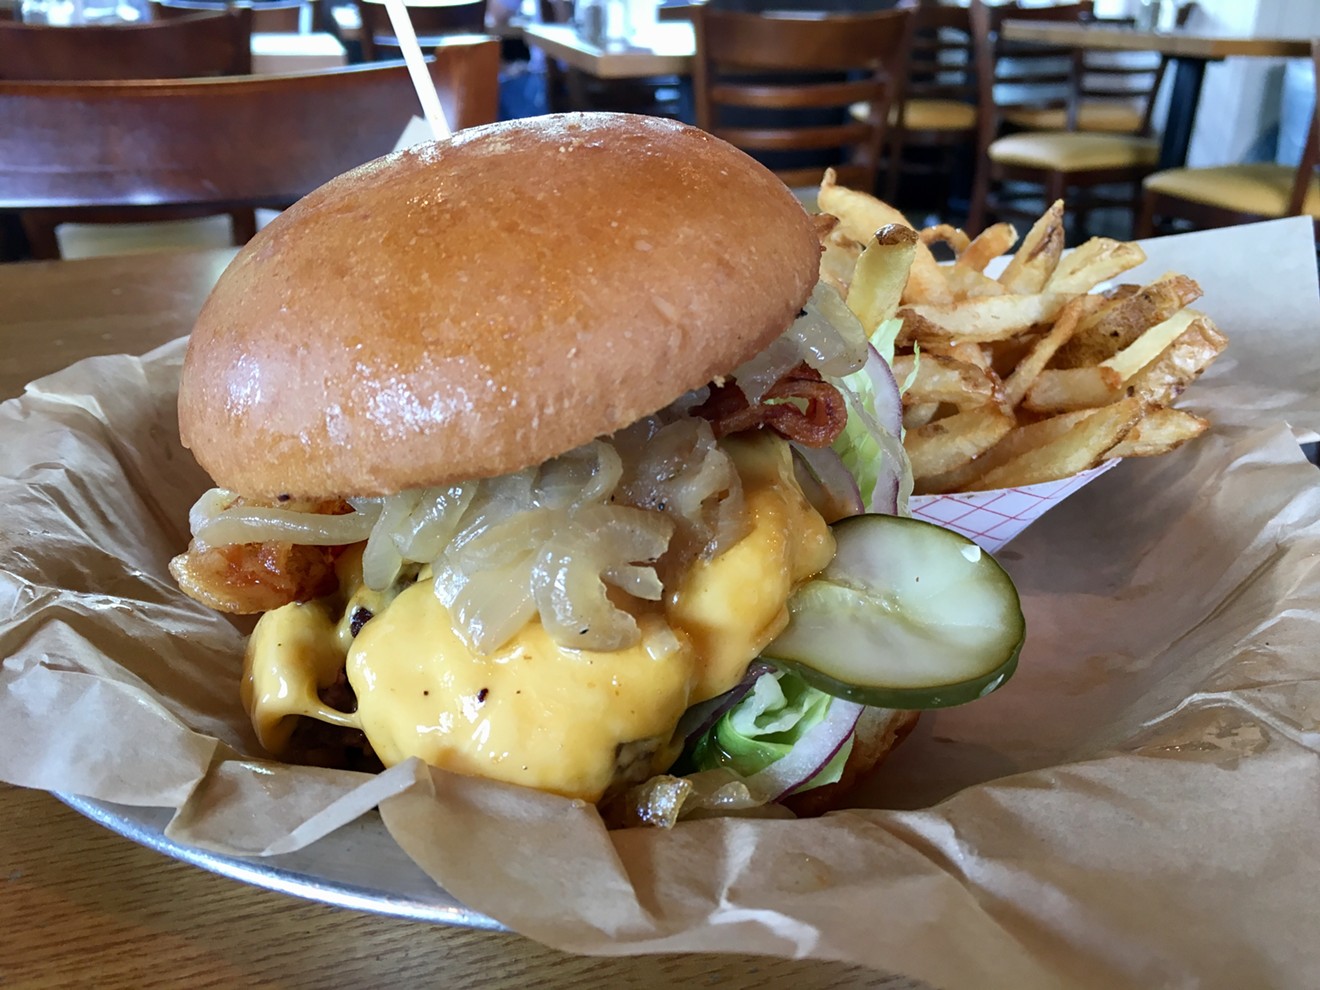 Stackhouse, which opened in Deep Ellum in 2011, has one of the city's most disappointing burgers.